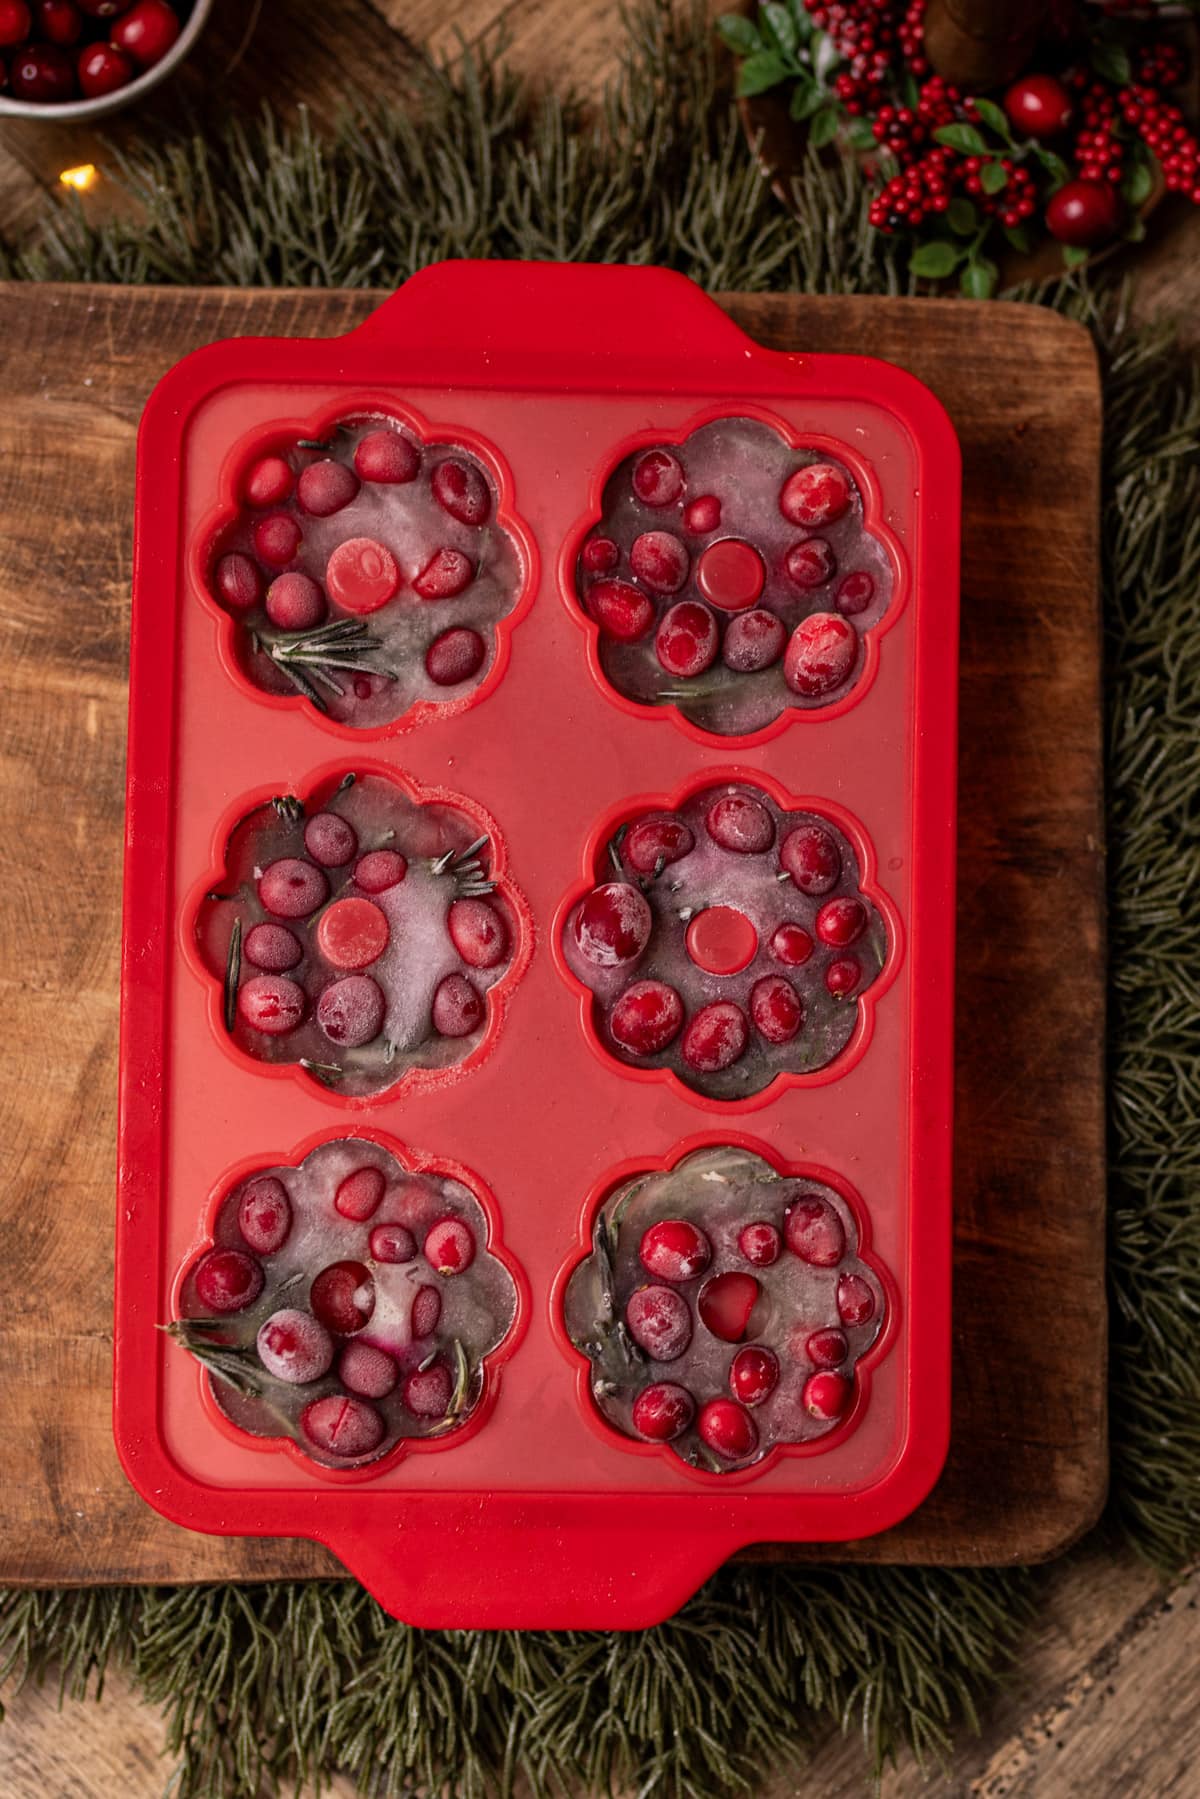 wreath shaped ice cubes in a red silicone tray